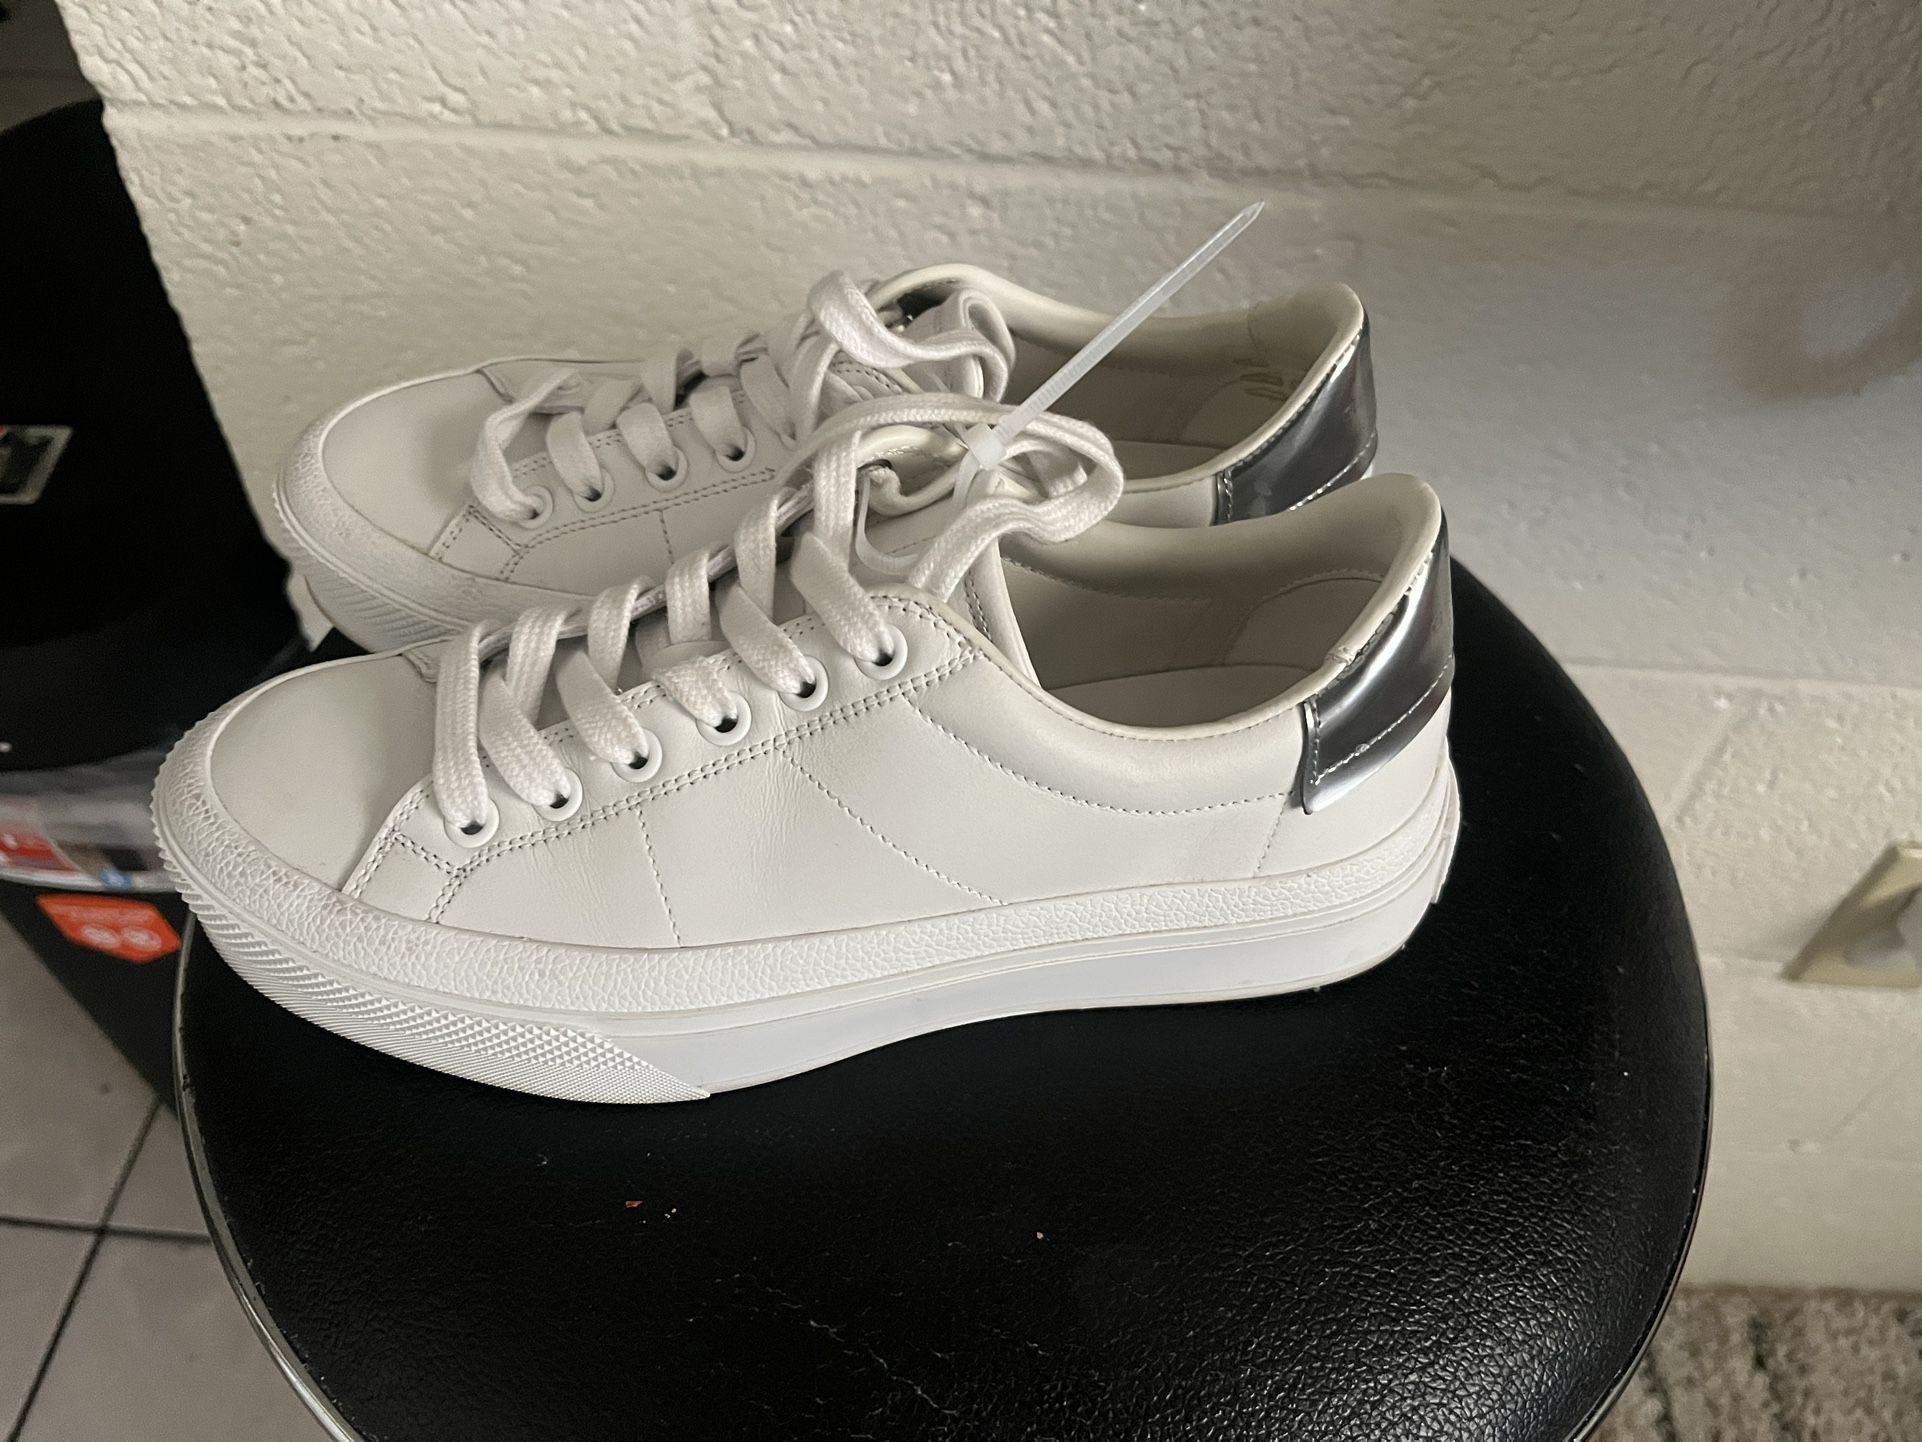 Givenchy Sneakers Size 35.5 for in Phoenix, OfferUp